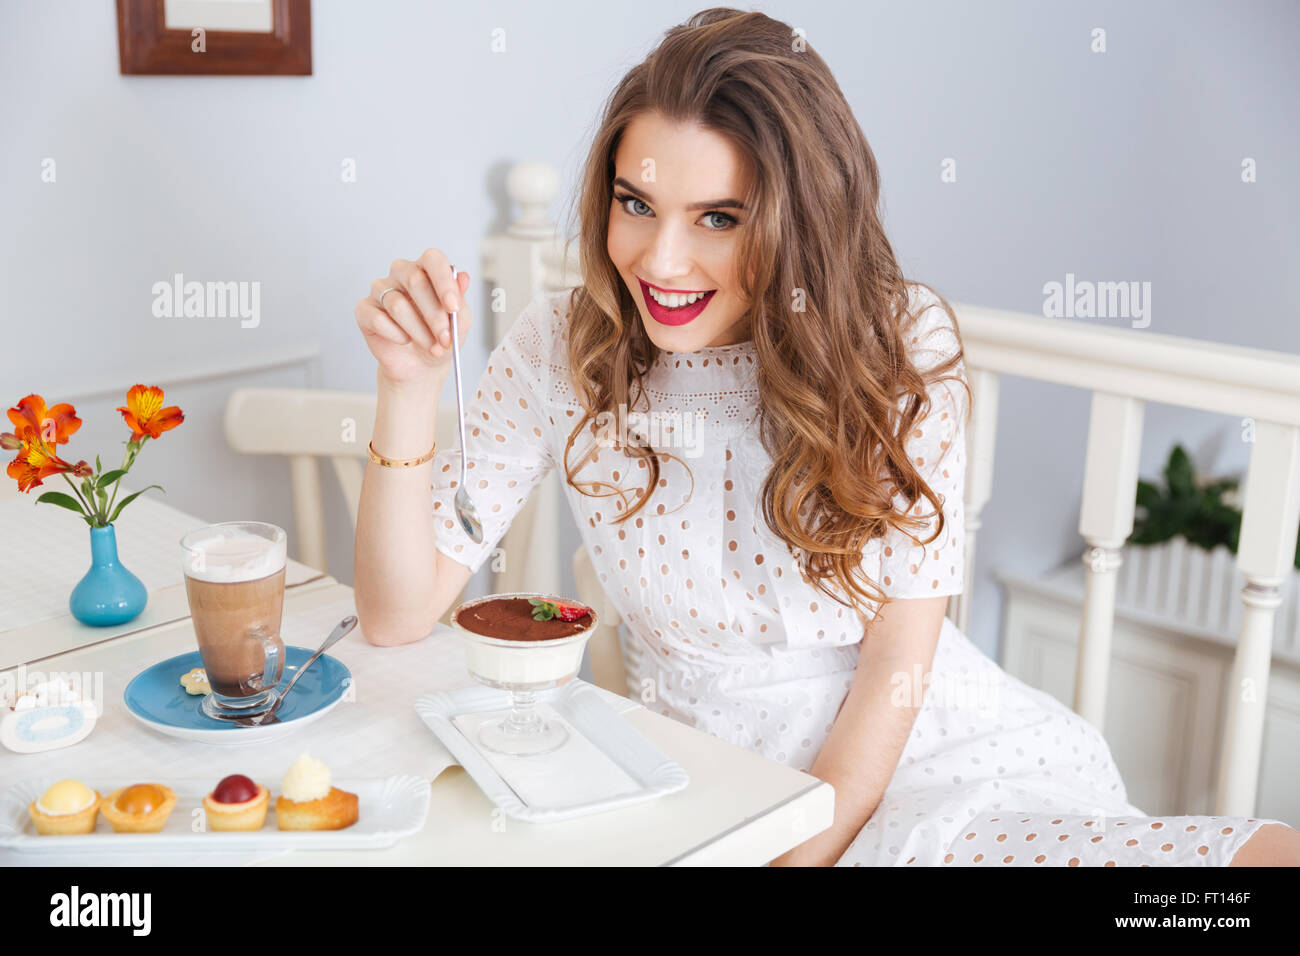 Cheerful pretty young woman with beautiful curly hair eating dessert and drinking latte in cafe Stock Photo